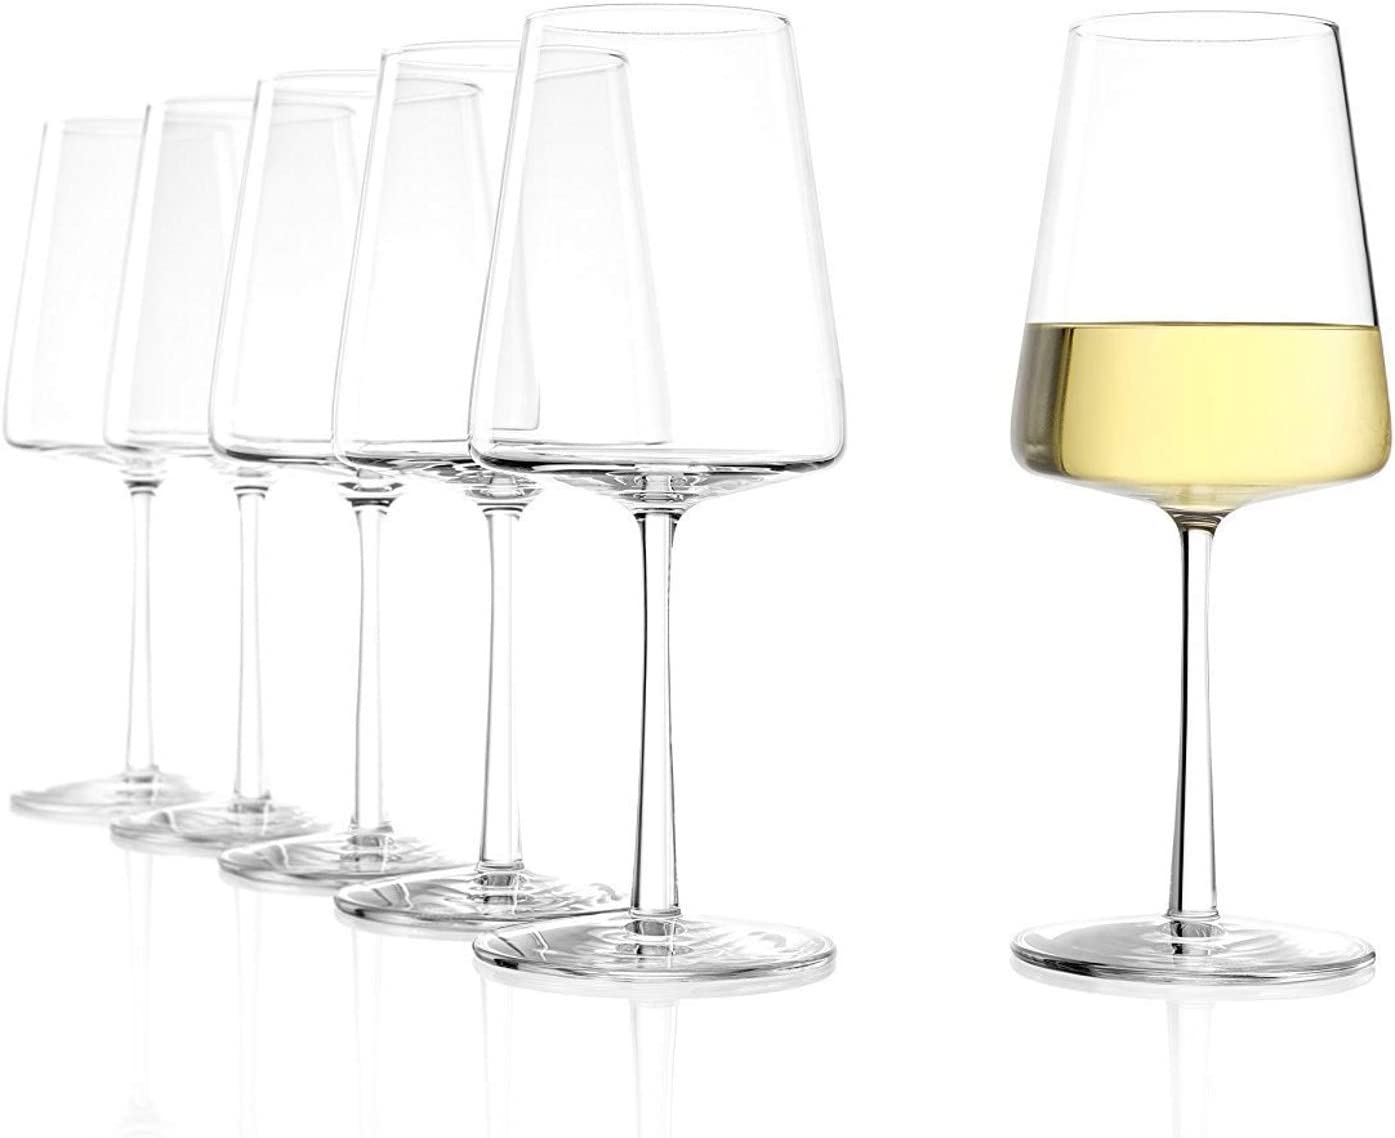 Stölzle Lausitz White Wine Glasses Power 404 ml Set of 6 with Calibration Mark 0.2 L Ideal for Catering and Hotels